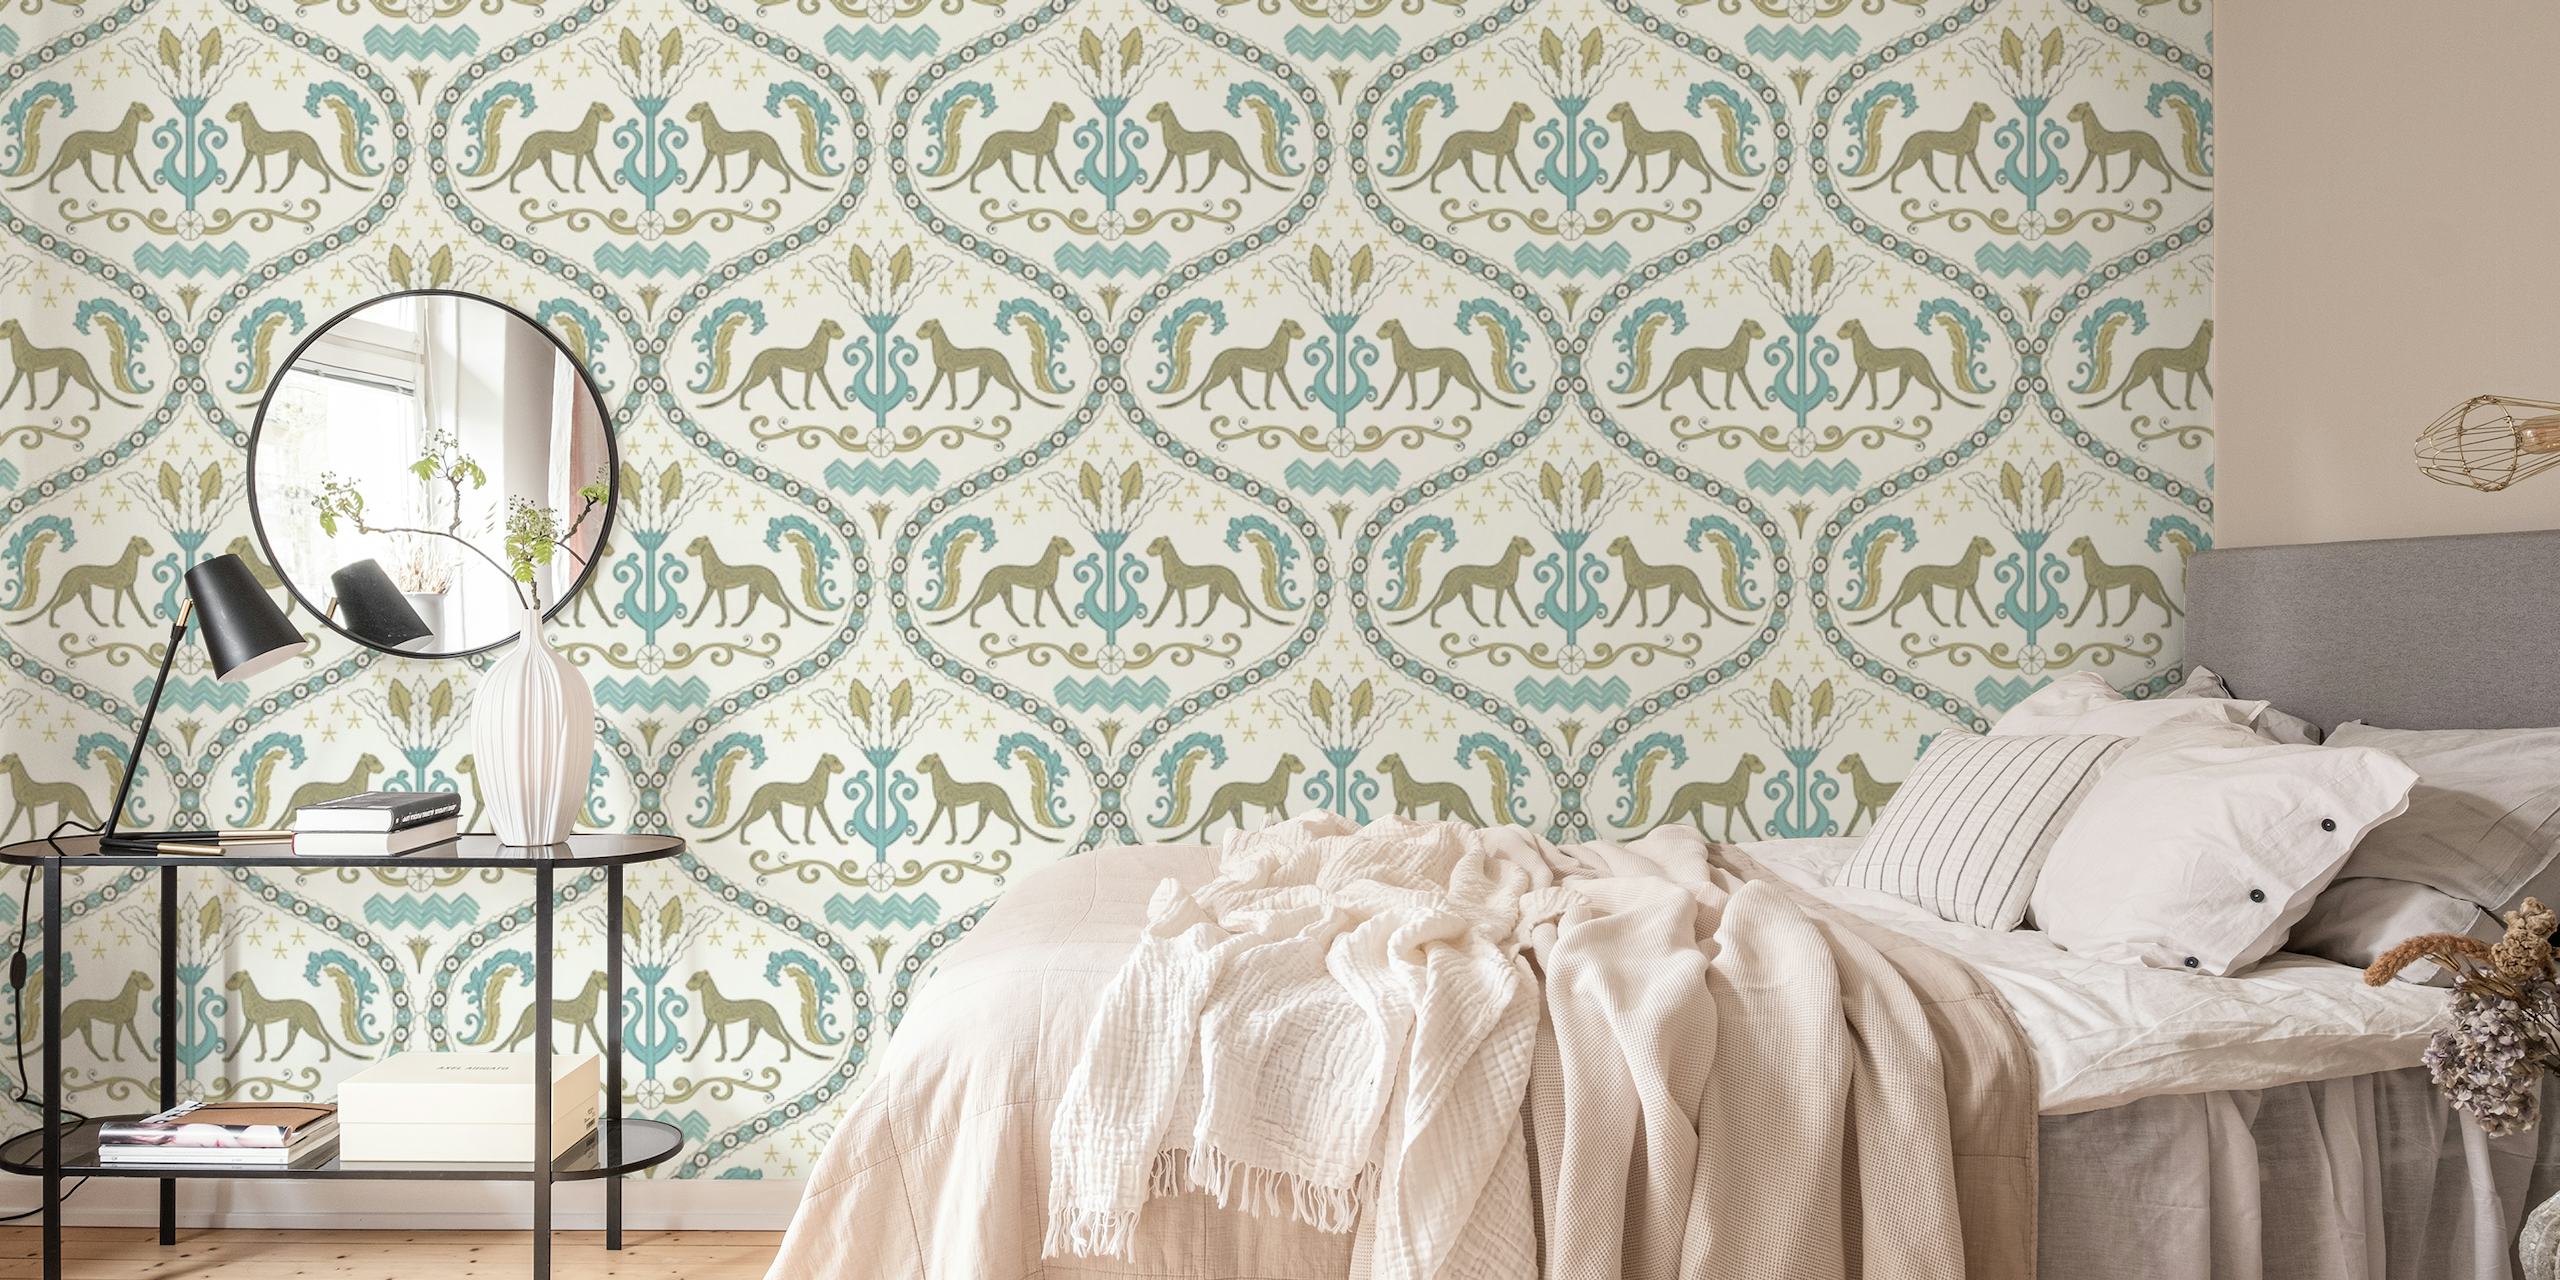 Jaguars Turquoise and Gold wall mural pattern